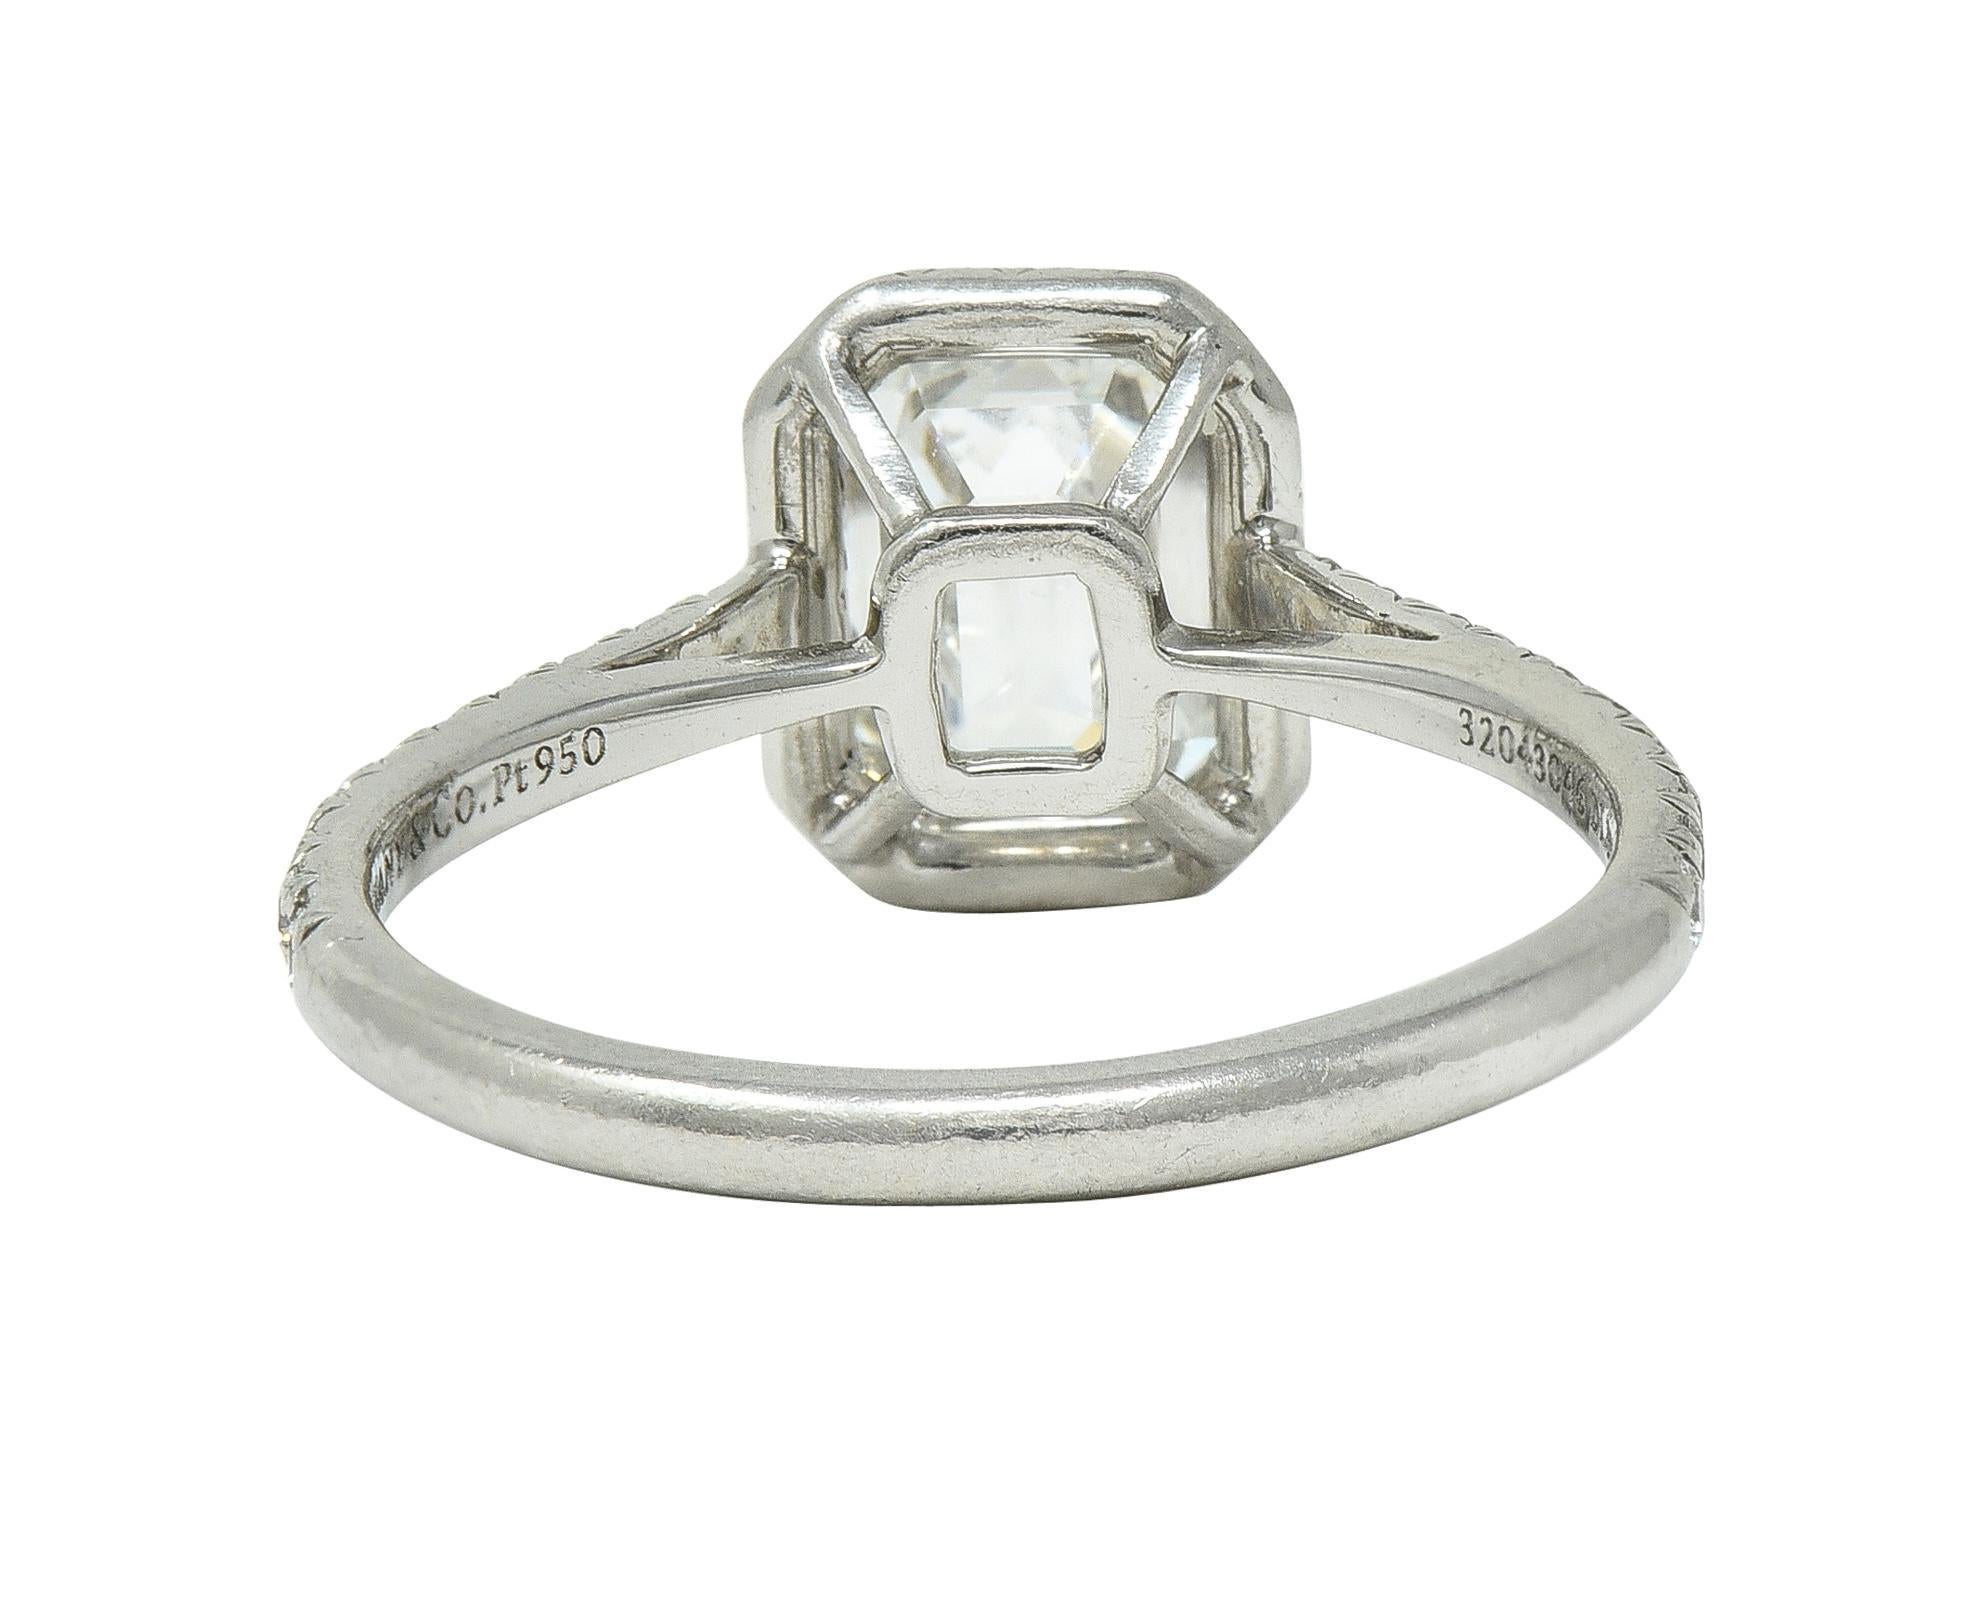 Tiffany & Co. 1.59 CTW Emerald Cut Diamond Platinum Soleste Engagement Ring In Excellent Condition For Sale In Philadelphia, PA